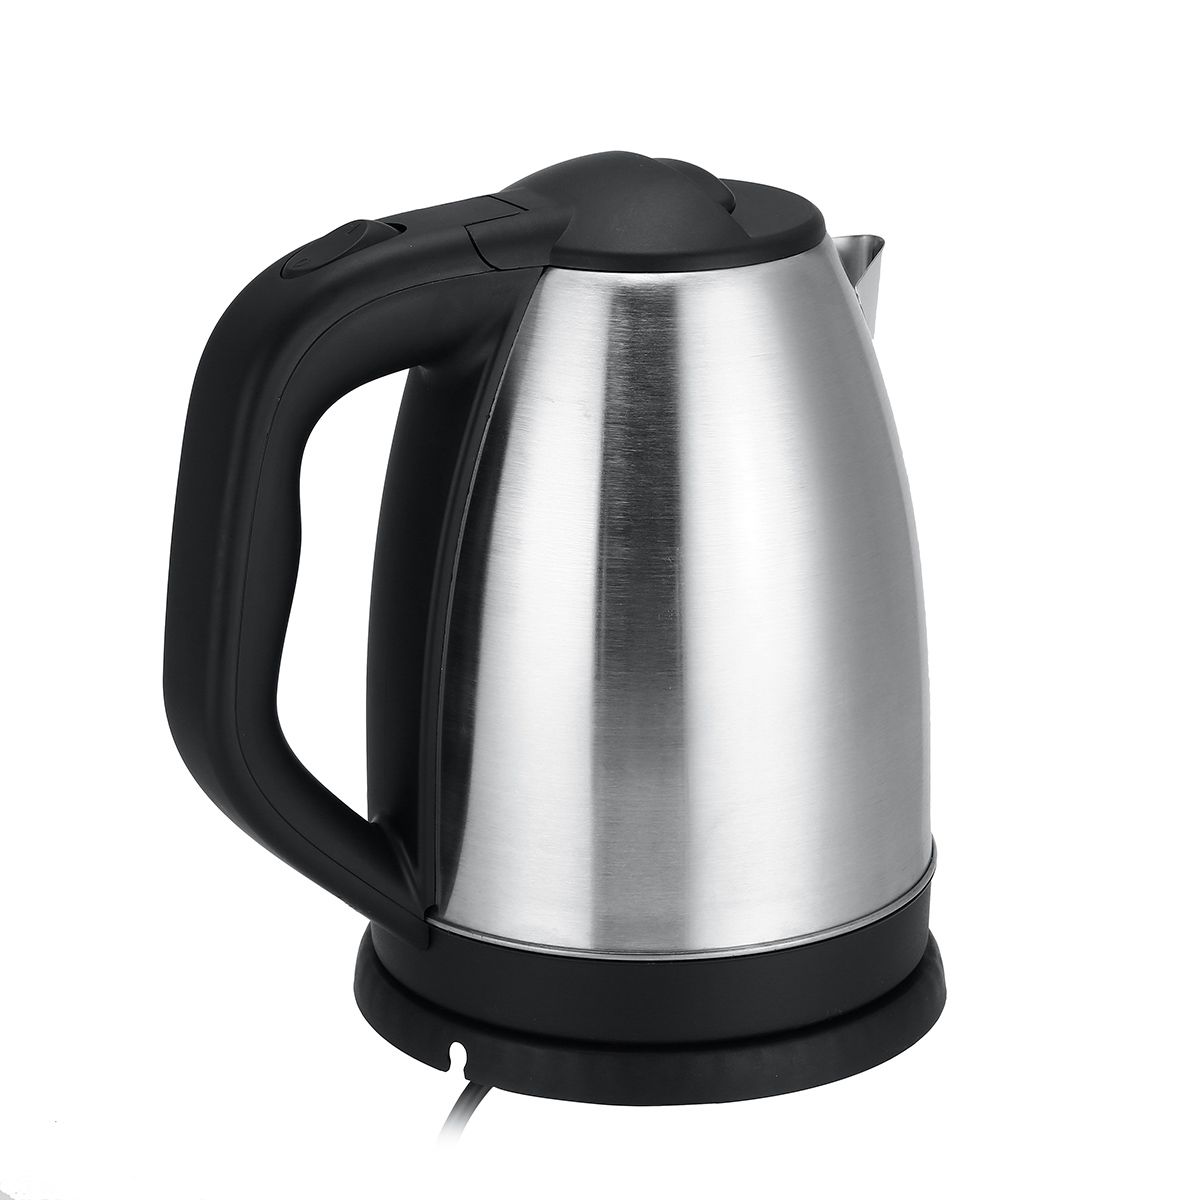 2000W-2L-Electric-Water-Kettle-Auto-Off-Heating-Teapot-Stainless-Steel-Large-1756989